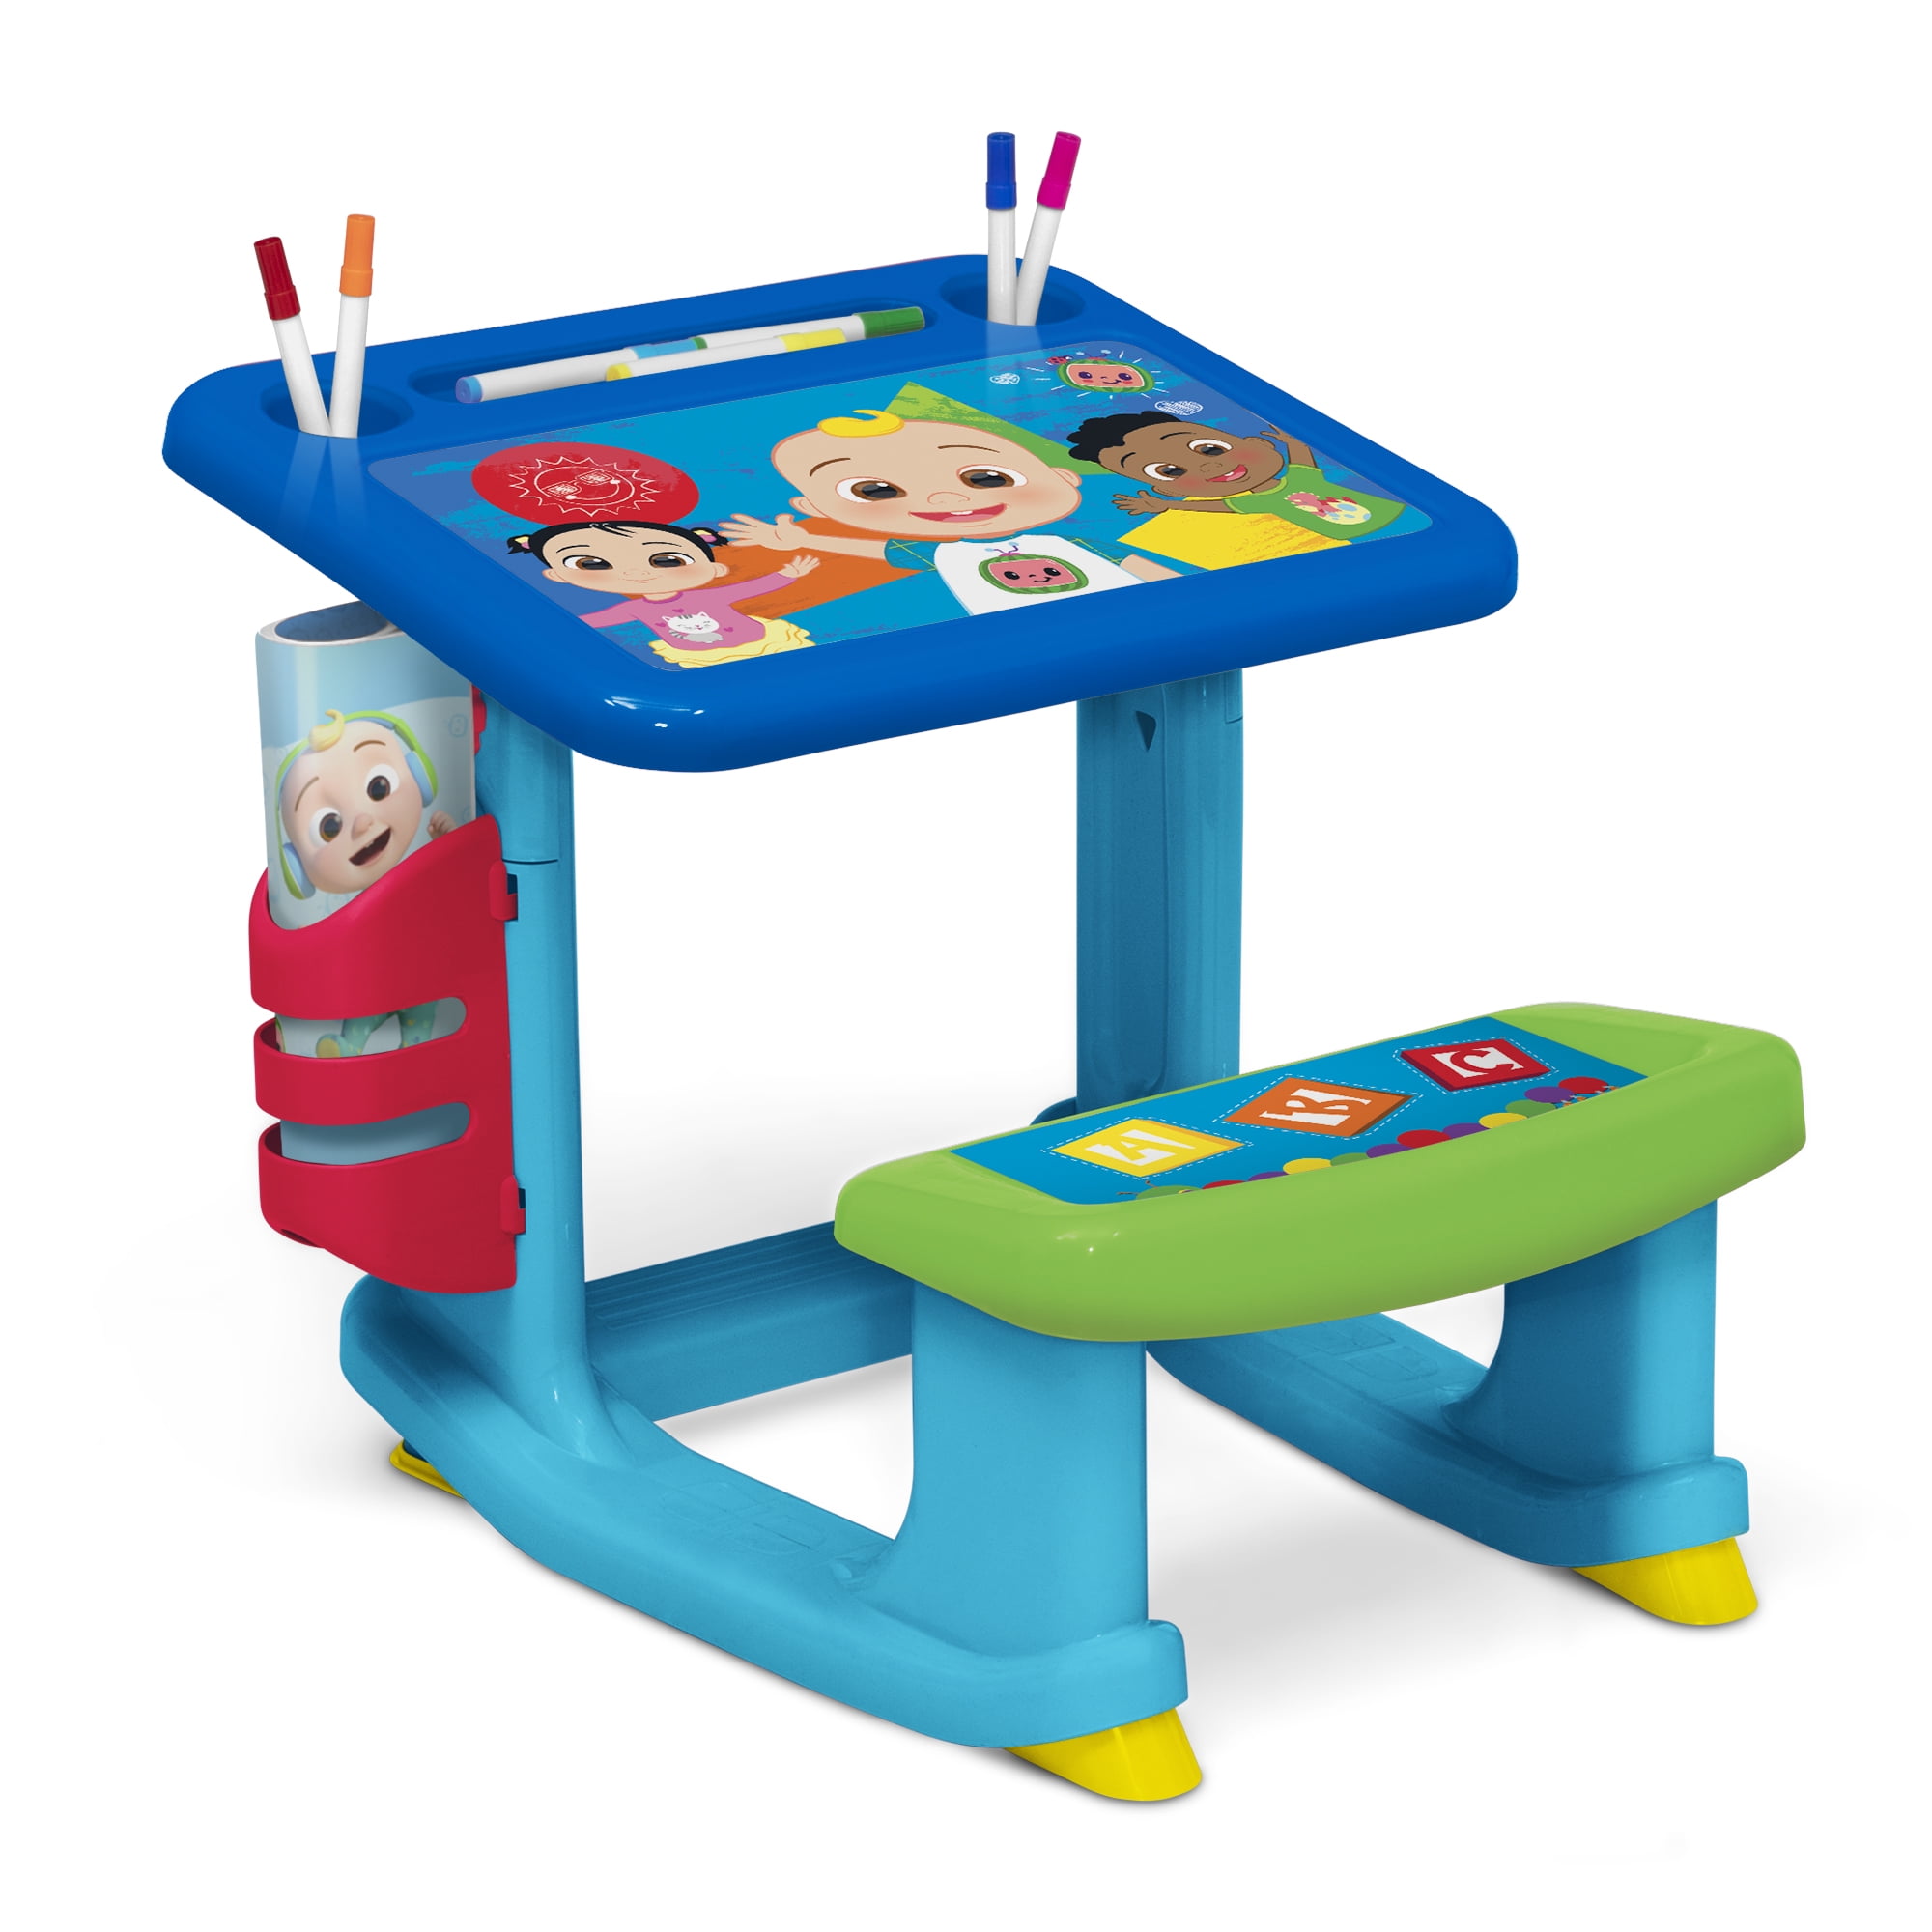 2 in 1 Magnetic Writing Board Building Blocks Kids Activity Table